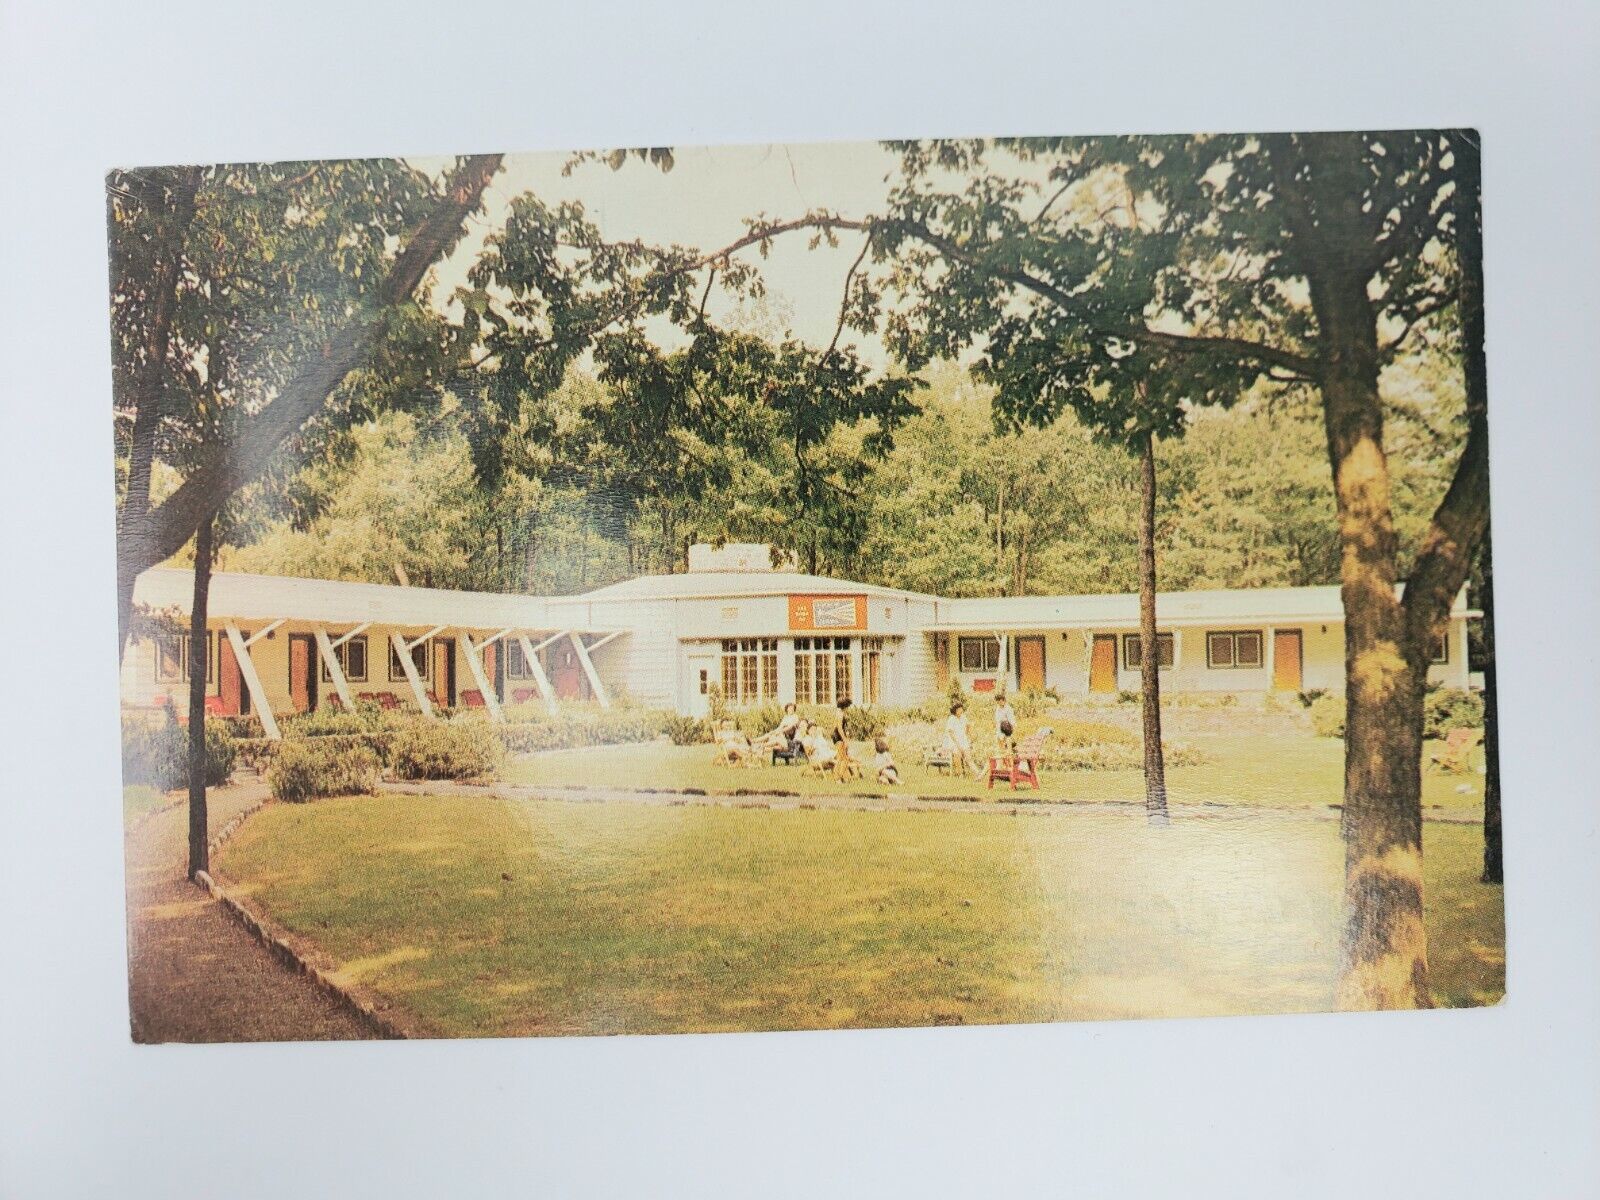 Unity House Local Building 91 Forest Park Penn 1962 Posted Postcard - Abandoned